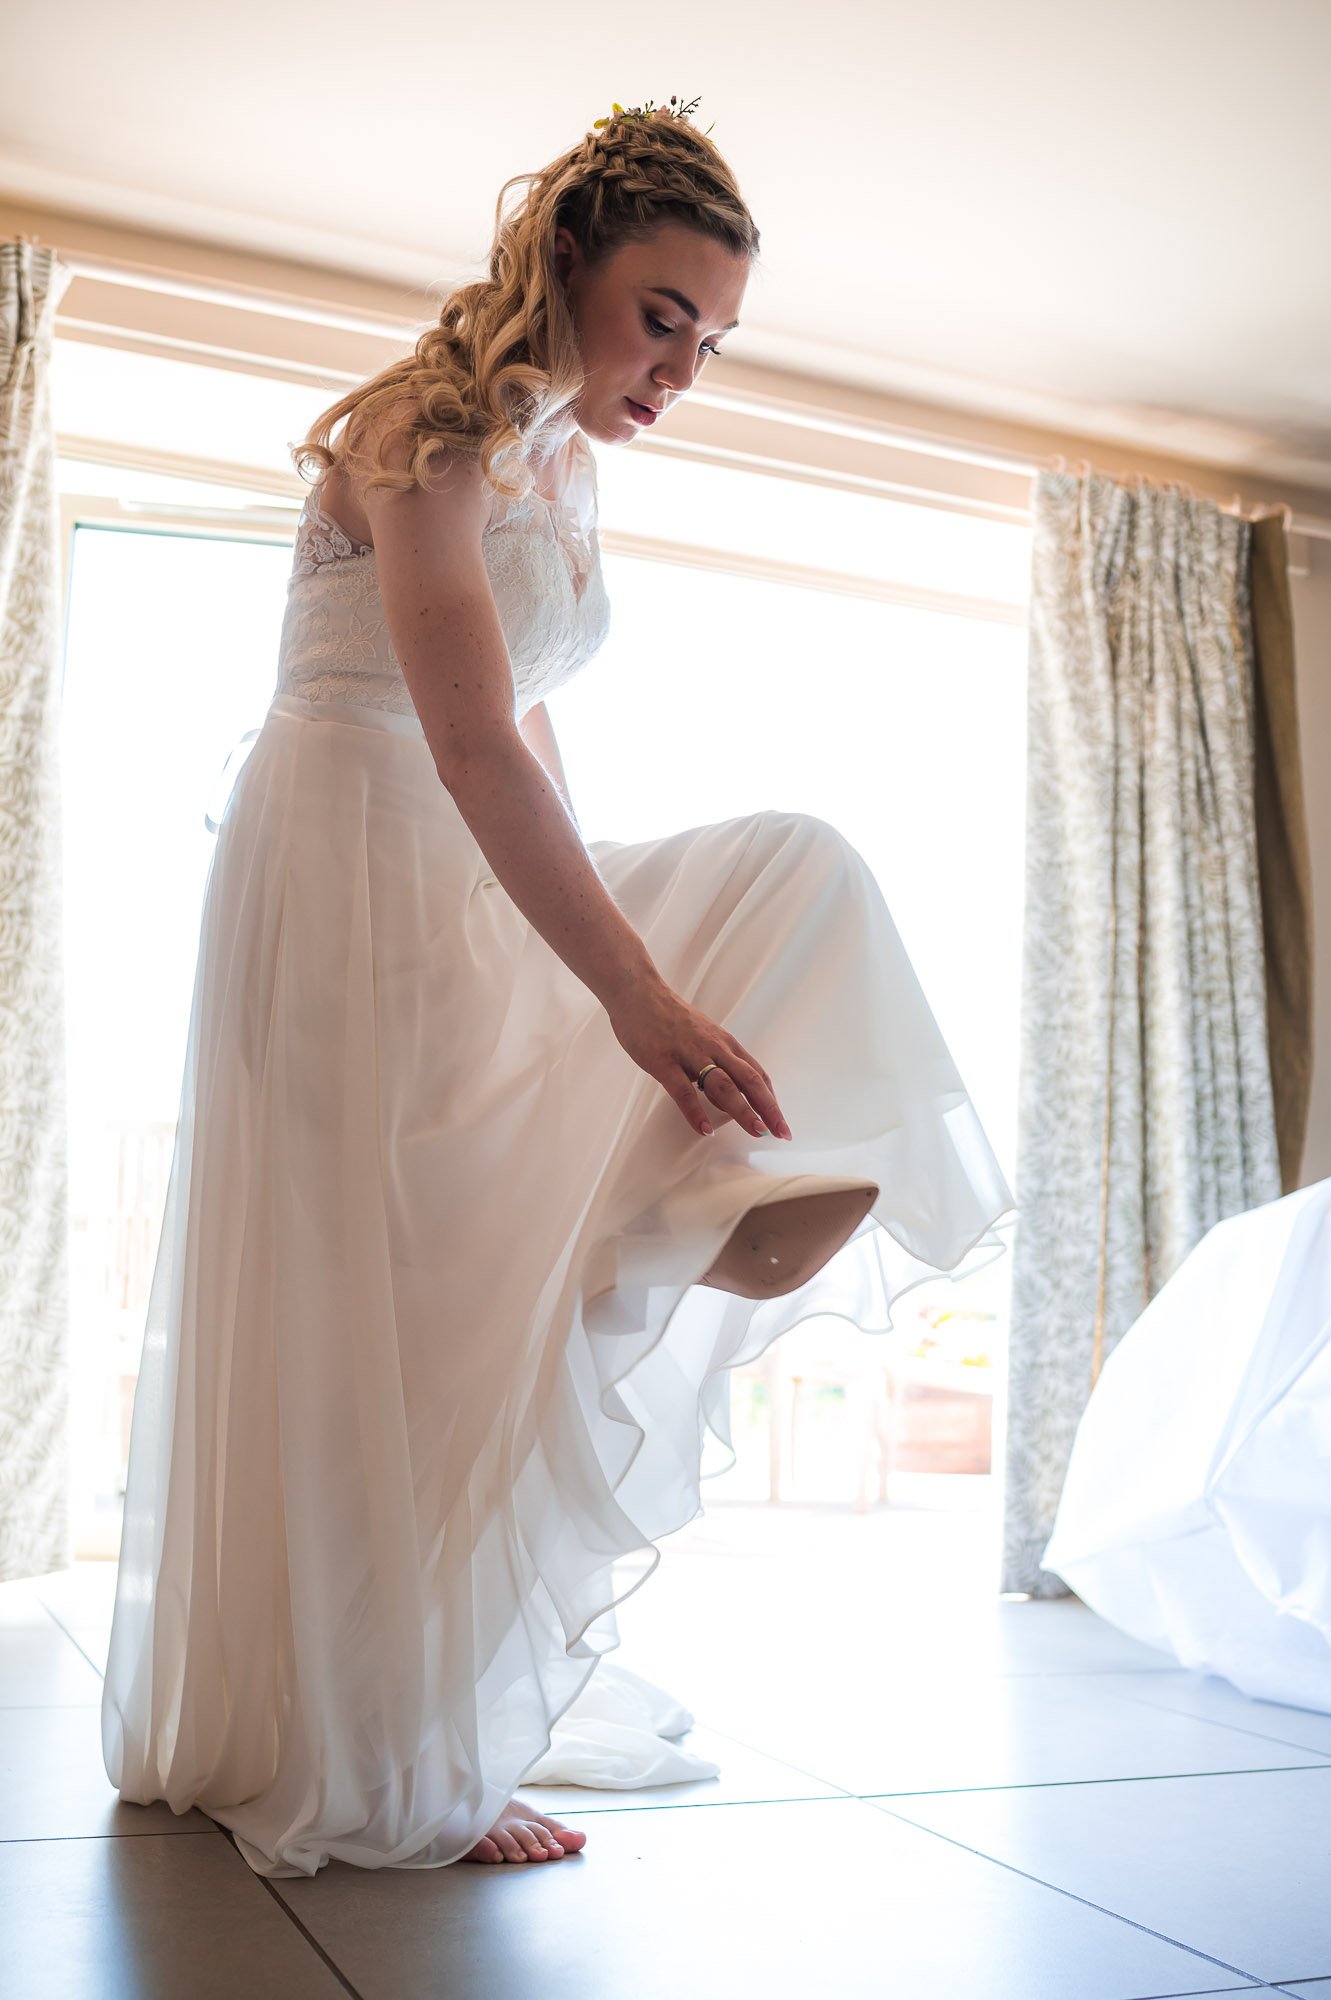 Bride putting her shoe on